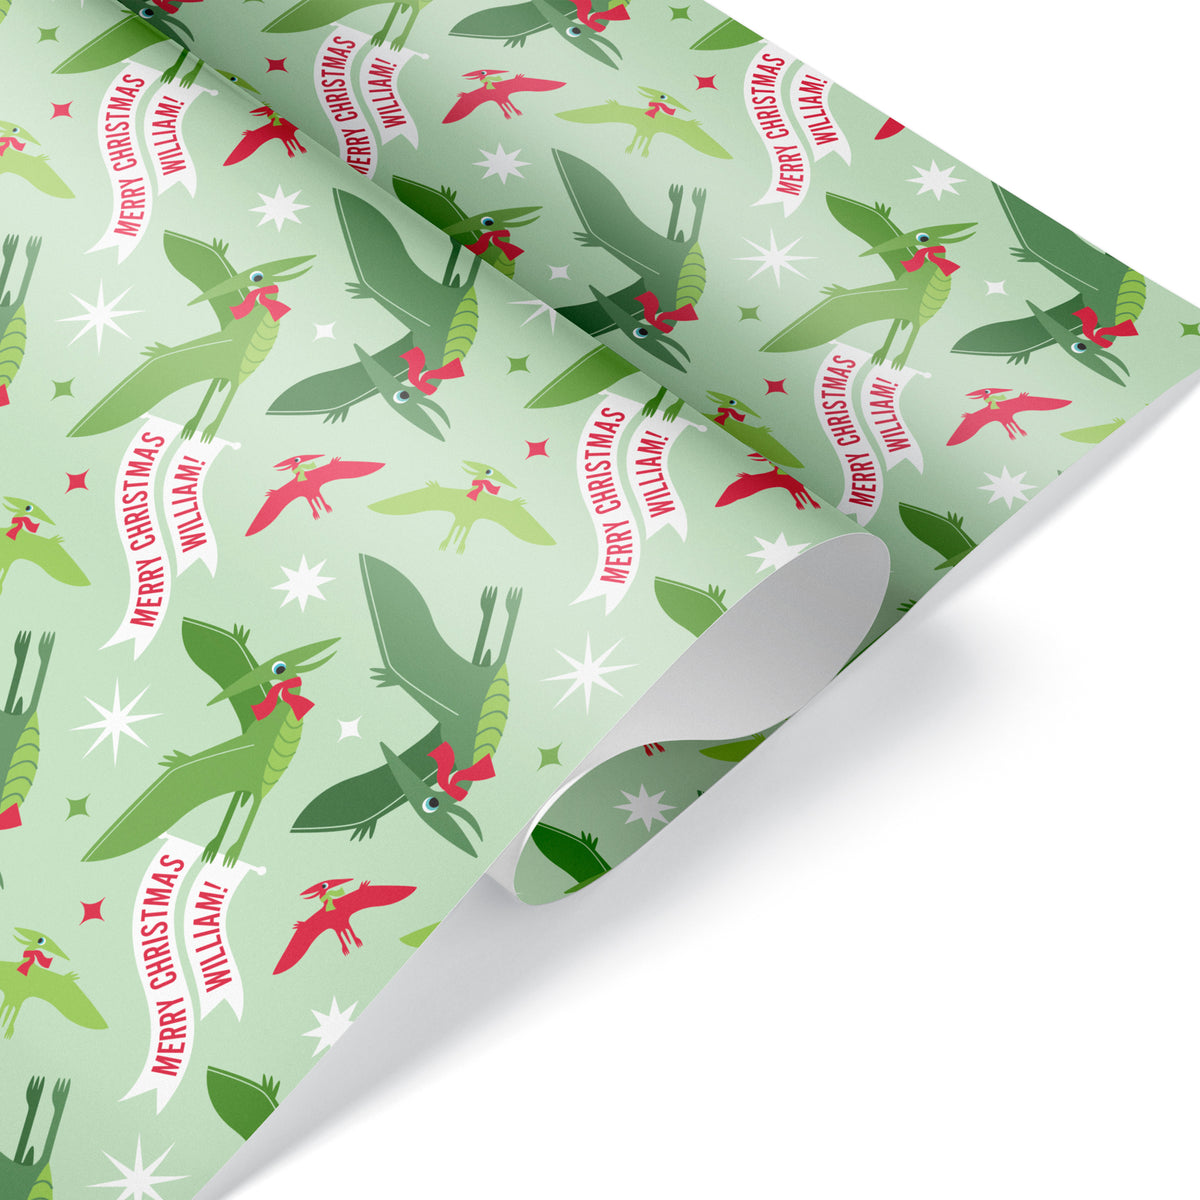 Pterodactyl Dinosaur Christmas Personalized Wrapping Paper - GREEN